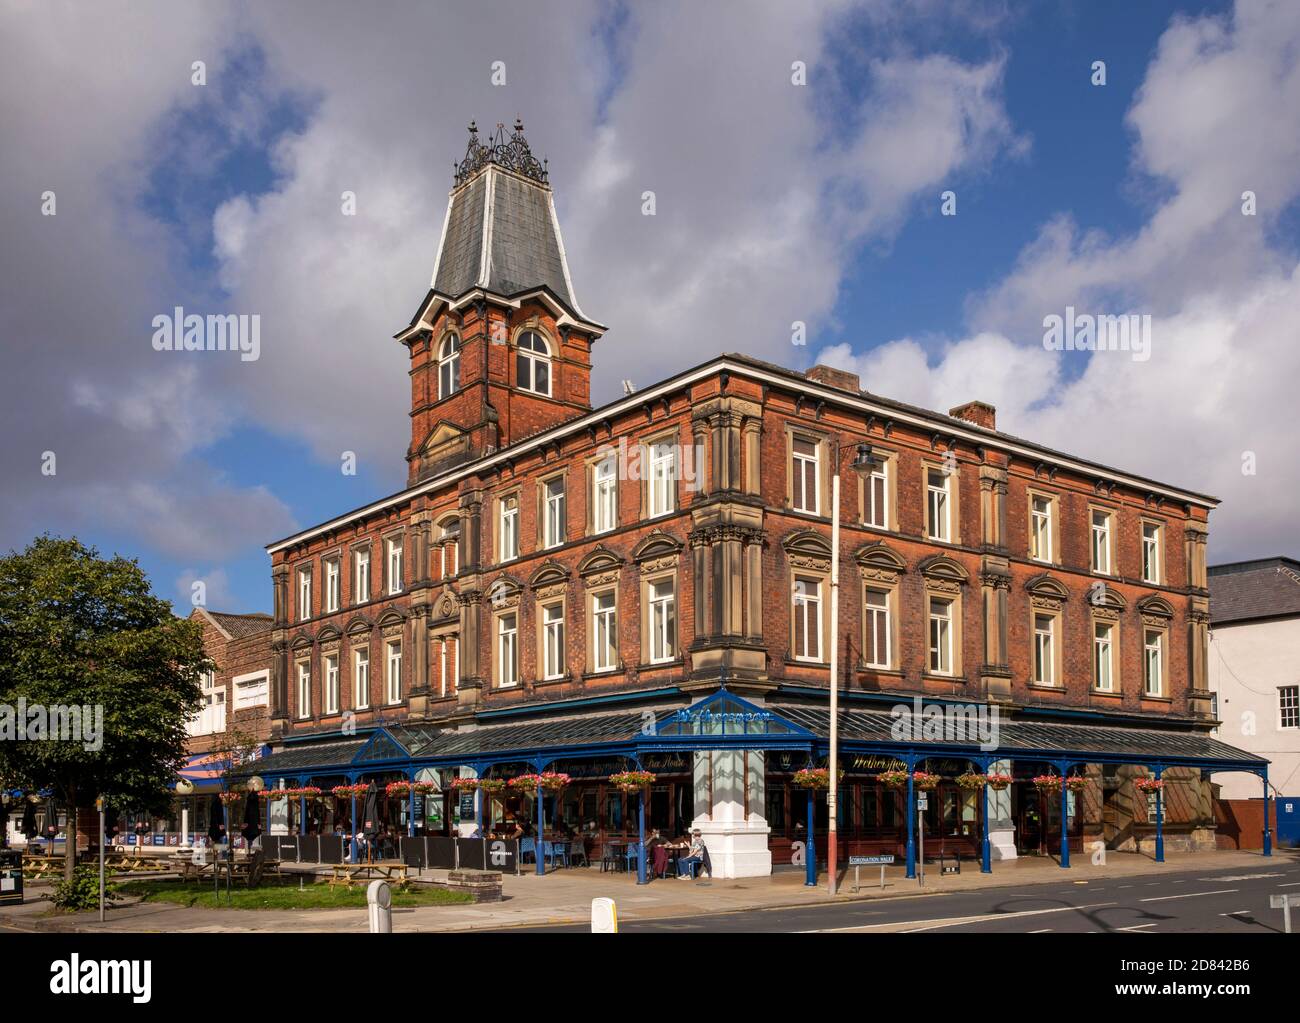 Regno Unito, Inghilterra, Merseyside, Southport, Lord Street, il pub ‘Sir Henry Segrave’ JD Wetherspoon Foto Stock